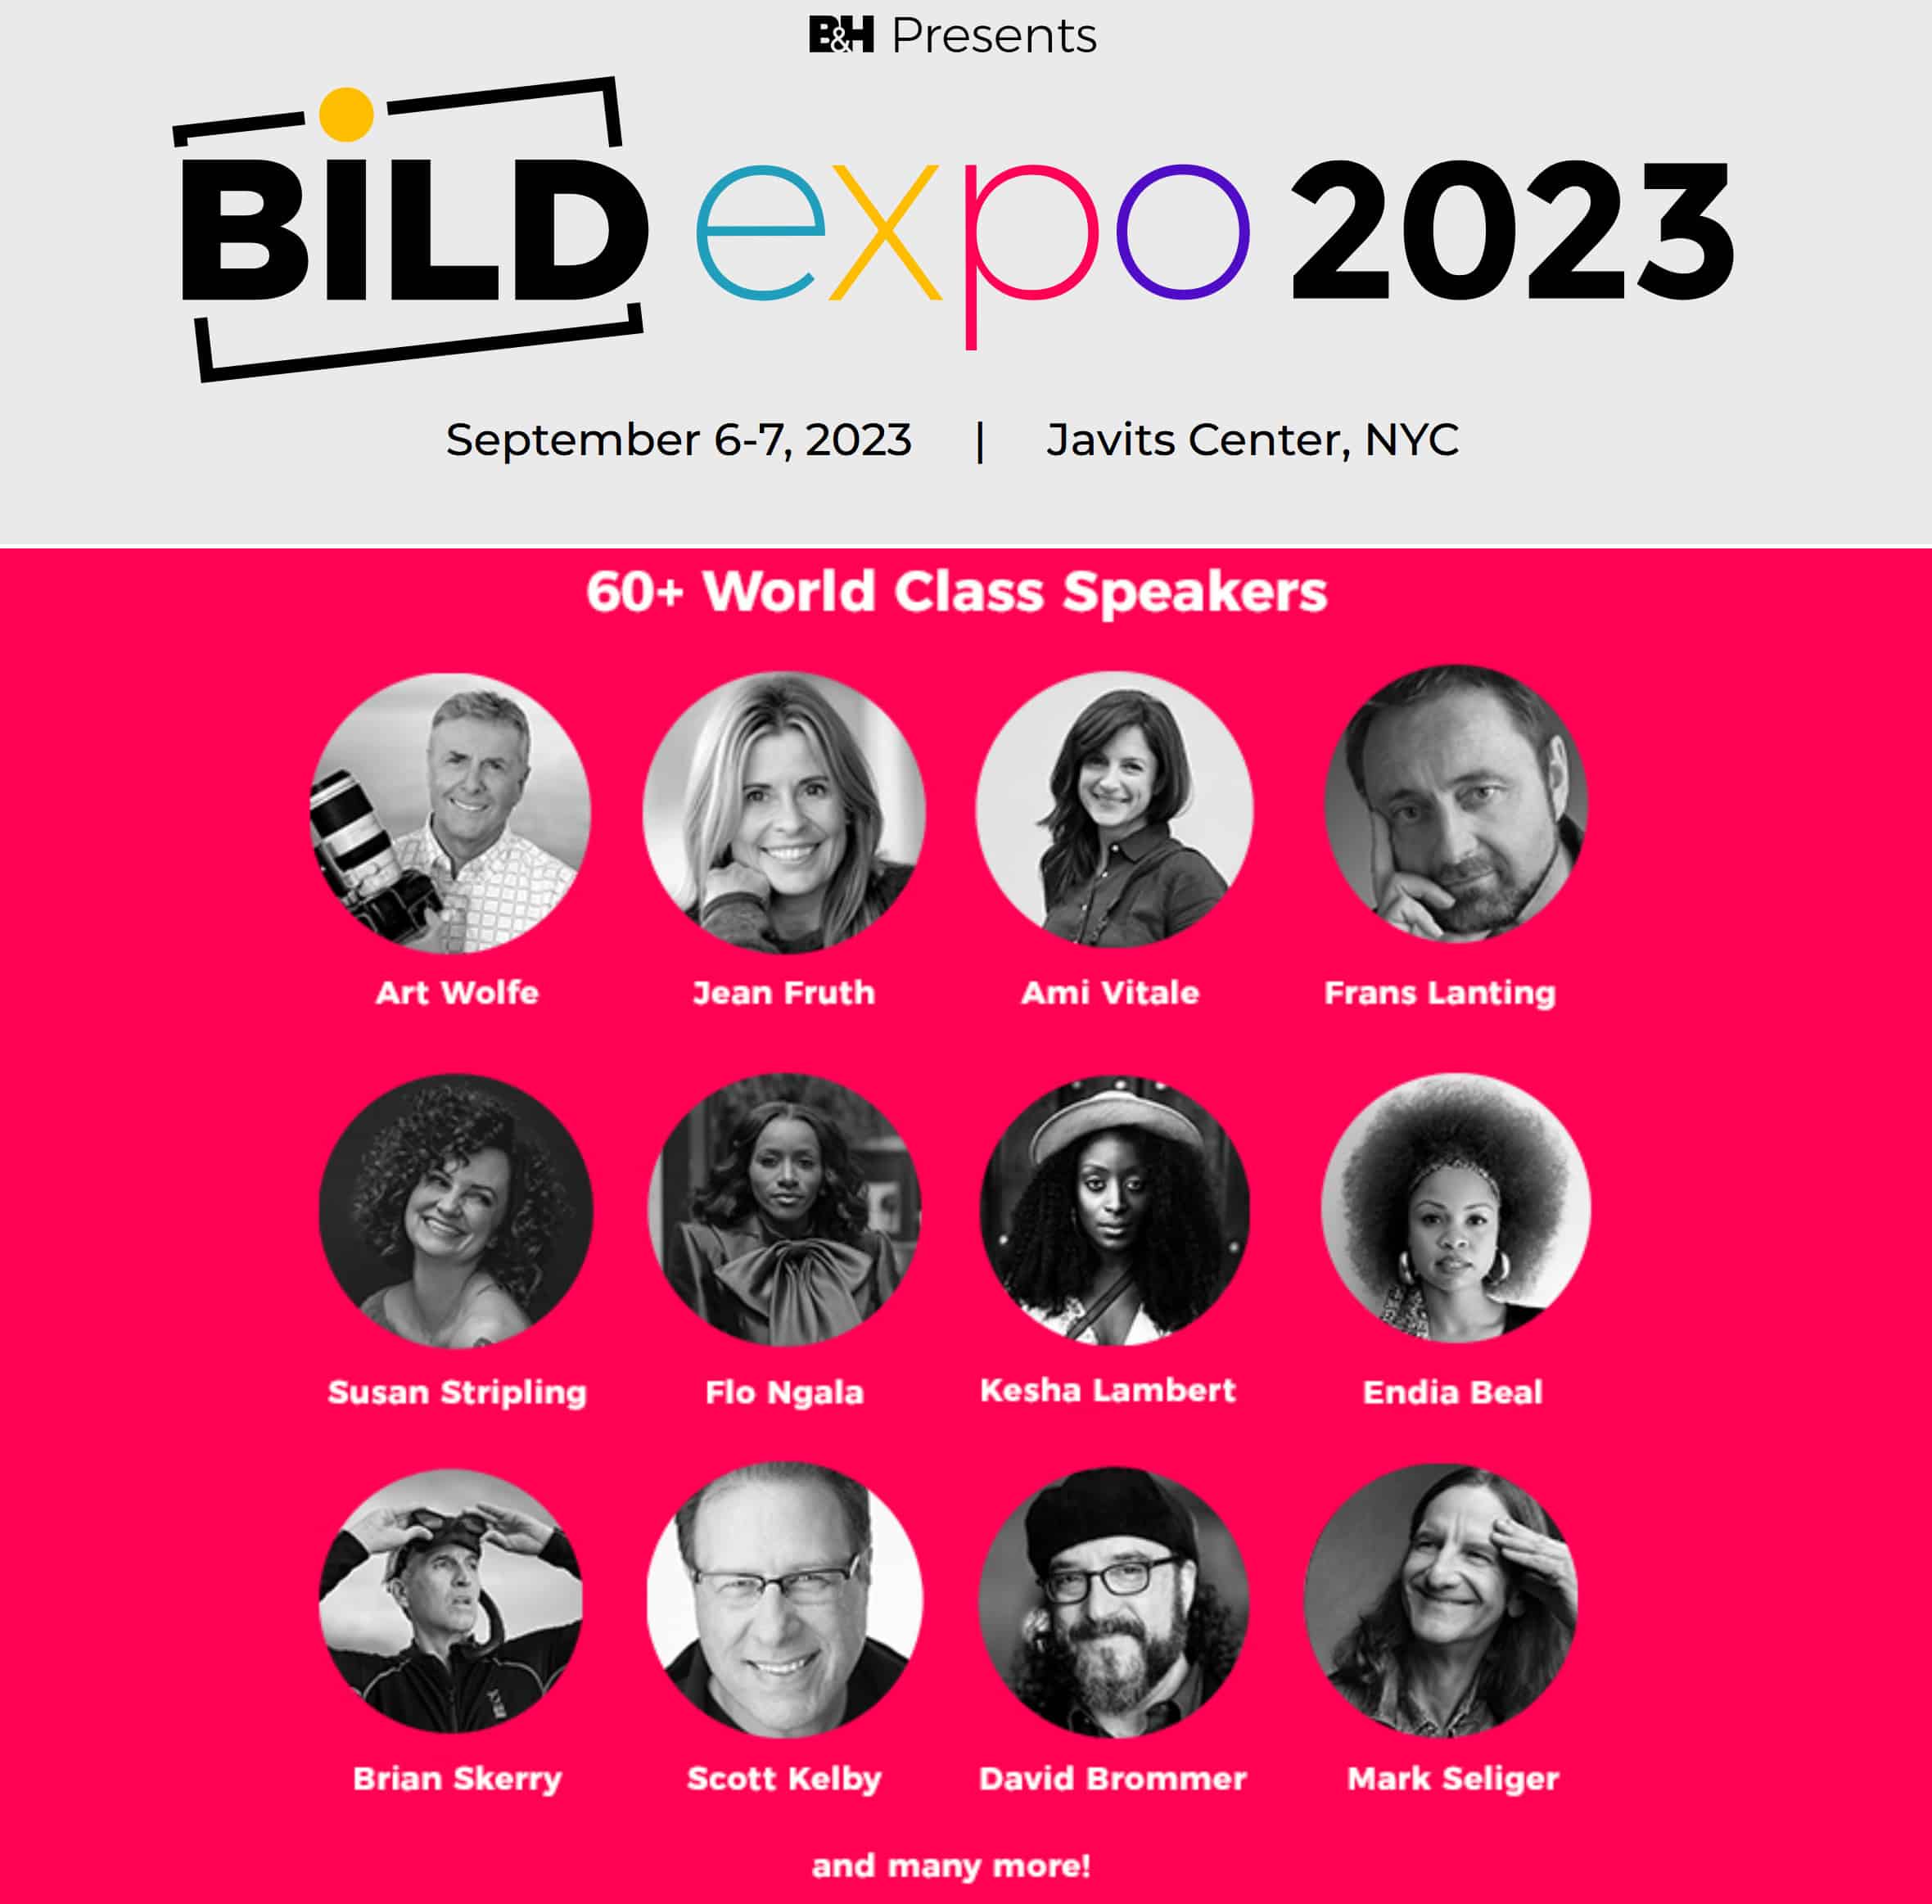 Register FREE Now for Bild Expo 2023 - Ignite Your Creative Journey!